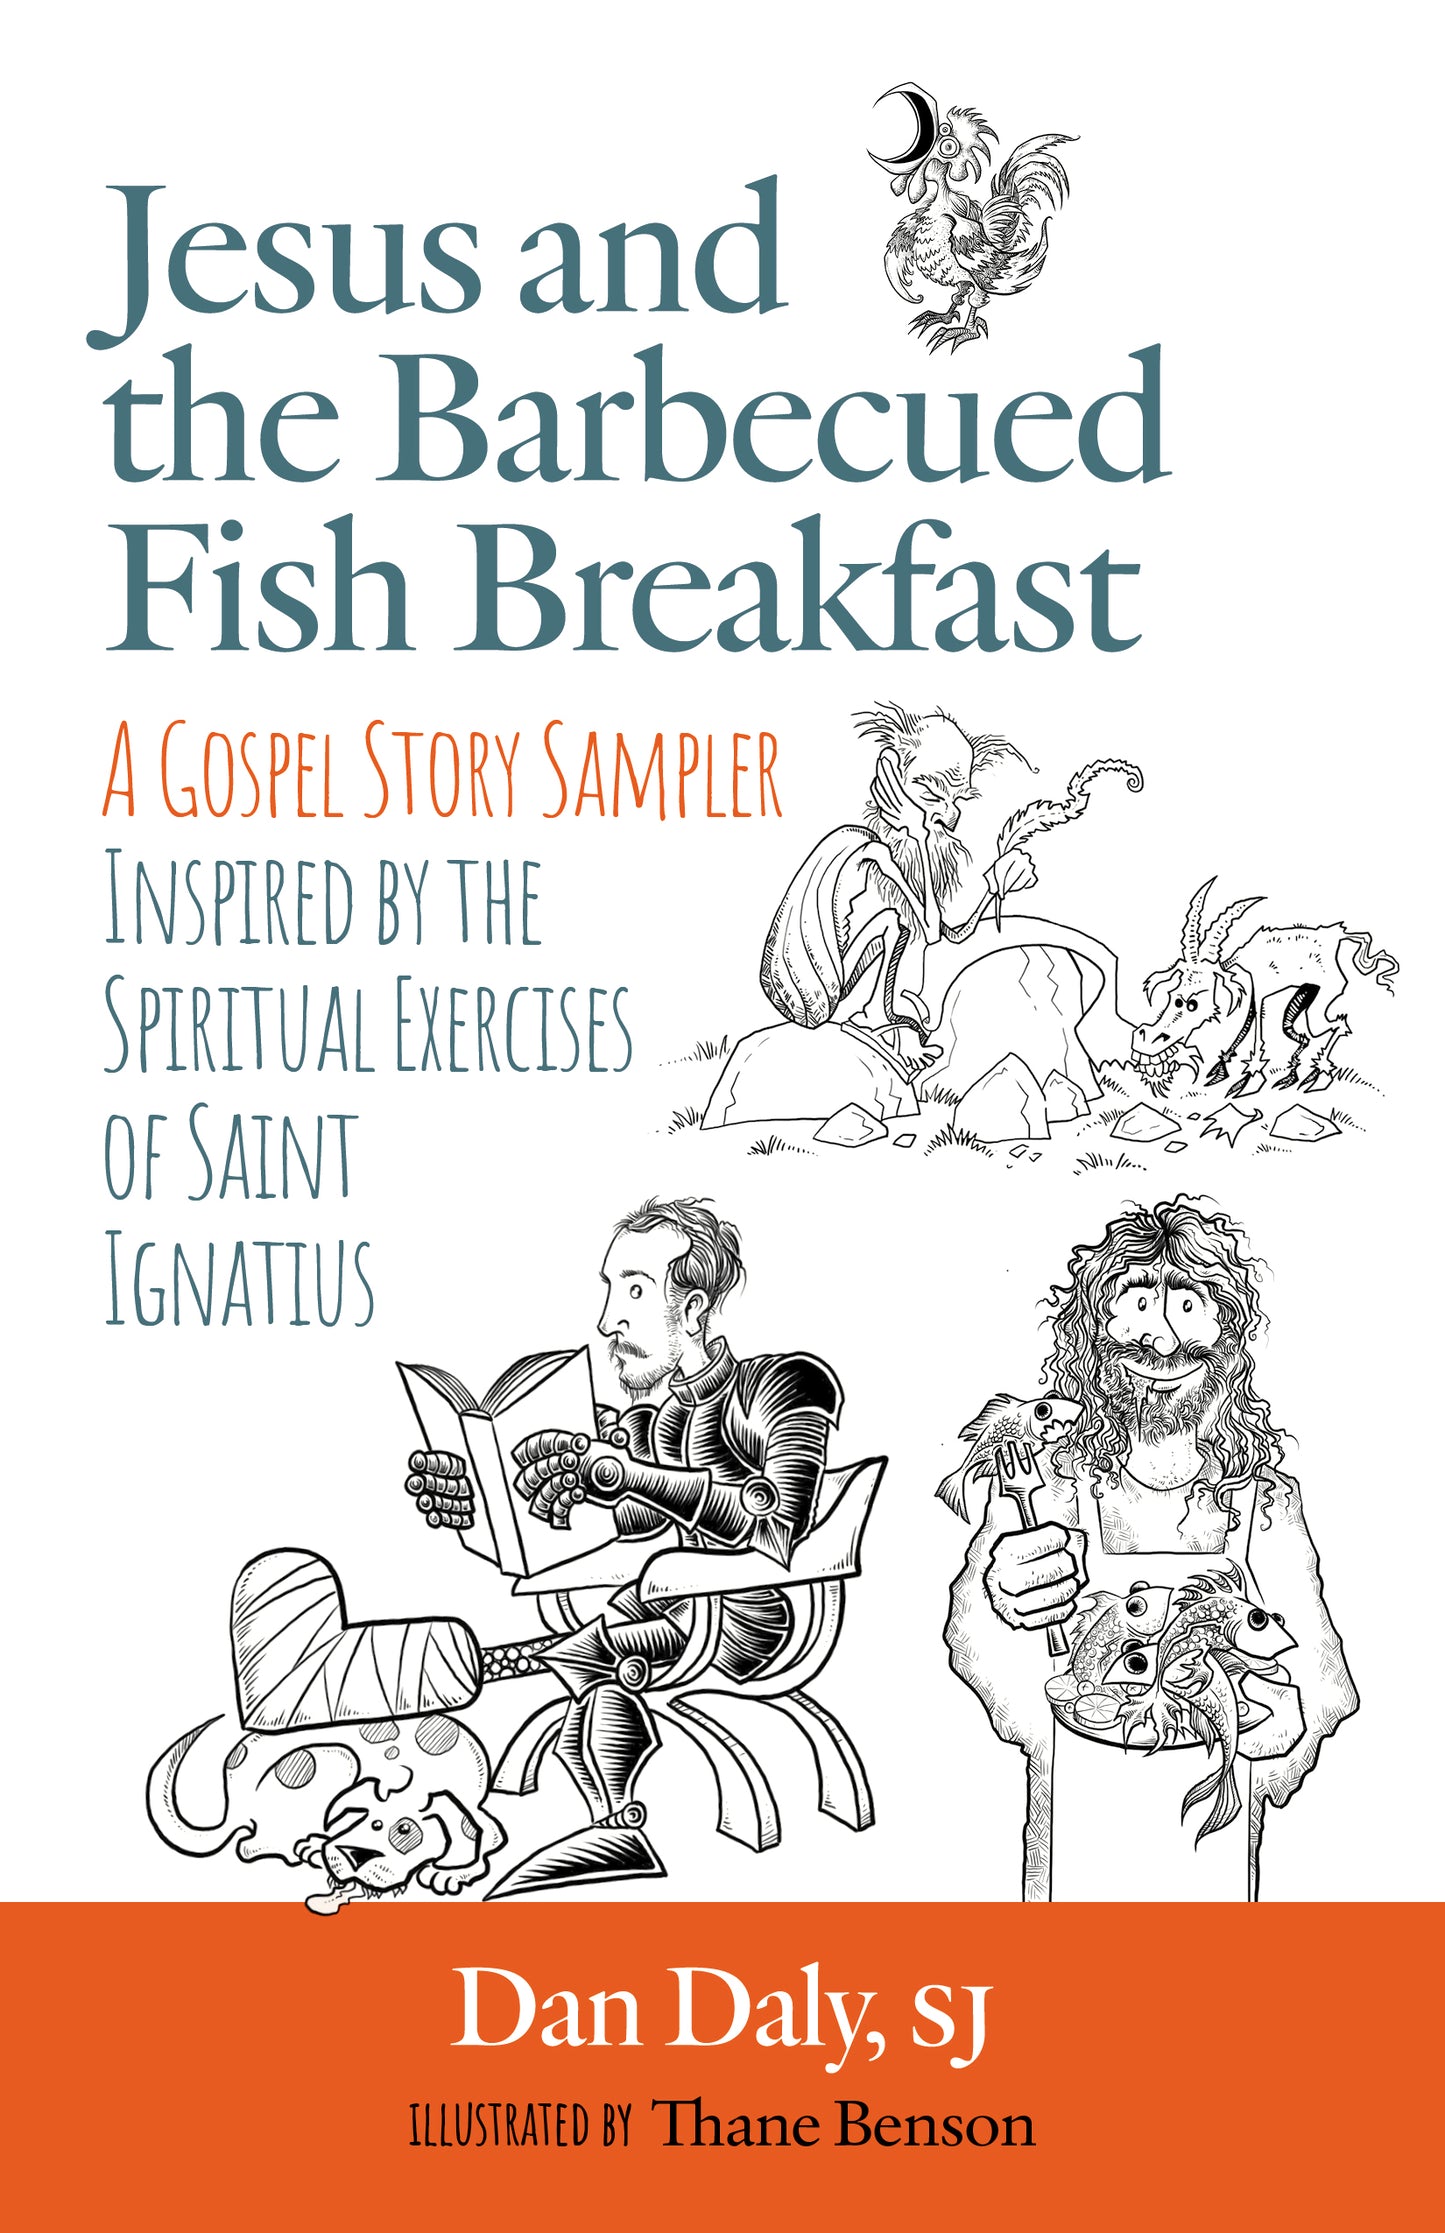 Jesus and the Barbecued Fish Breakfast